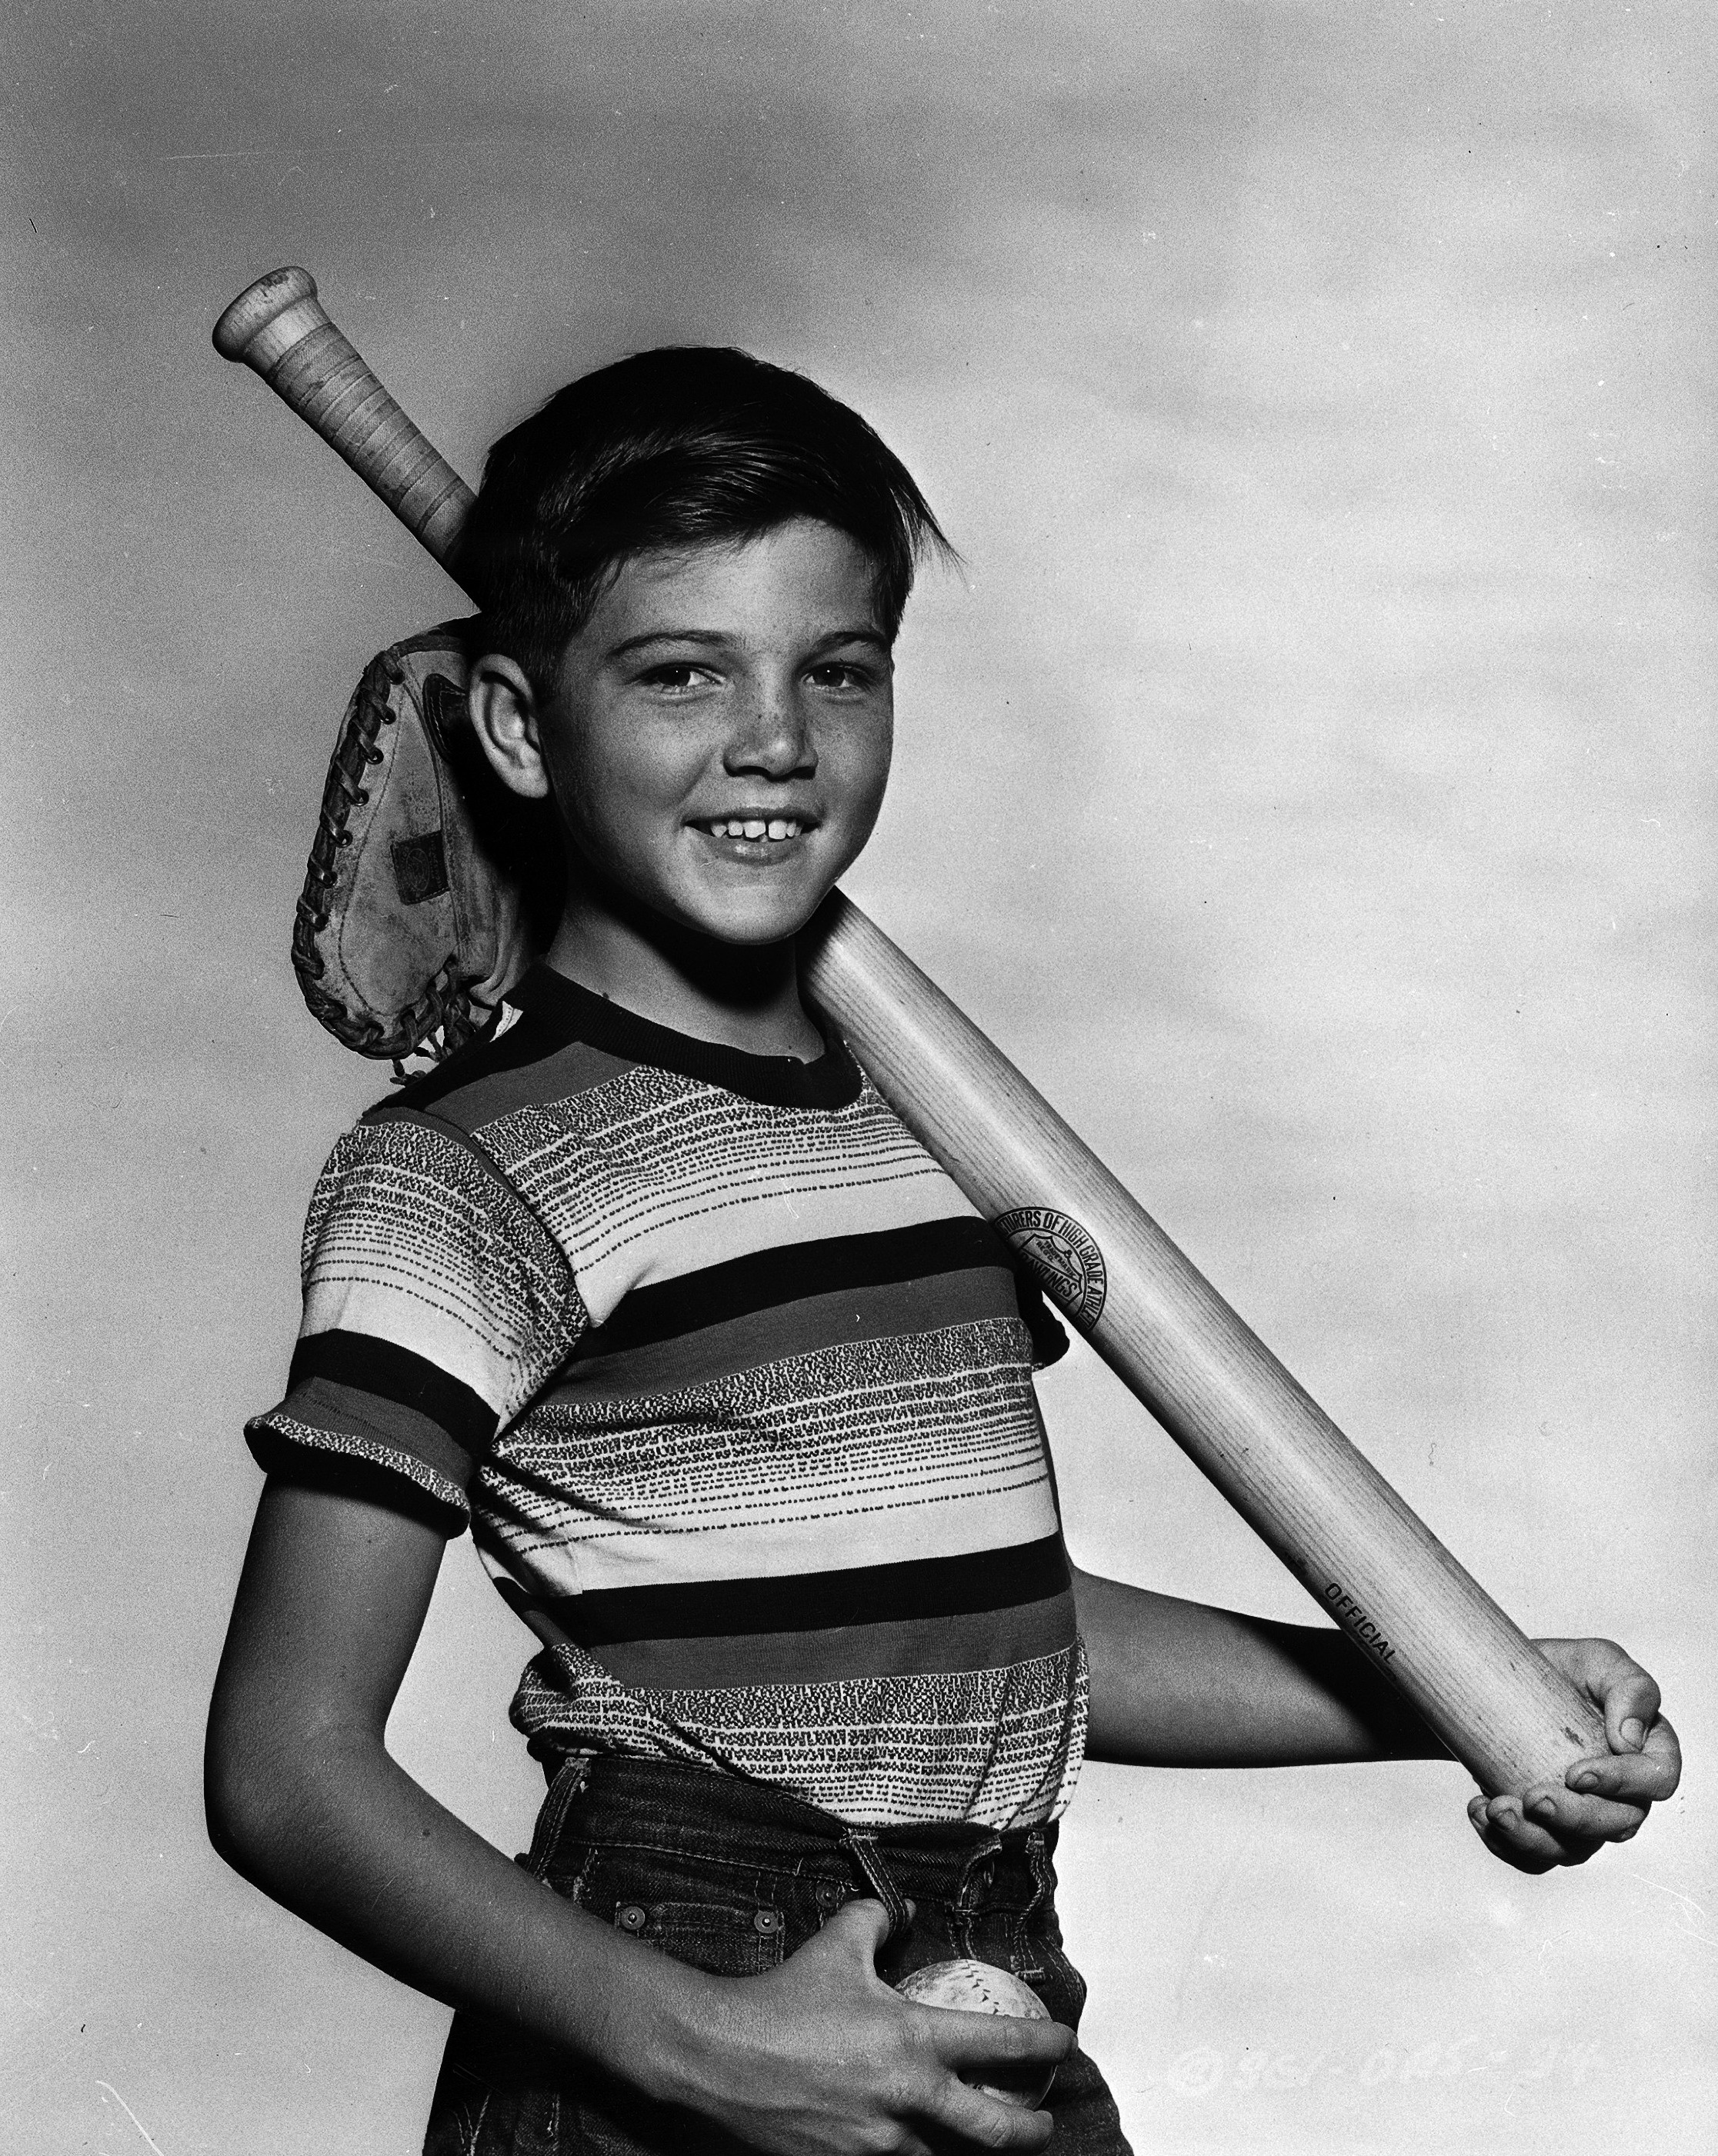 Paul Petersen for "The Donna Reed Show" circa 1958 | Source: Getty Images